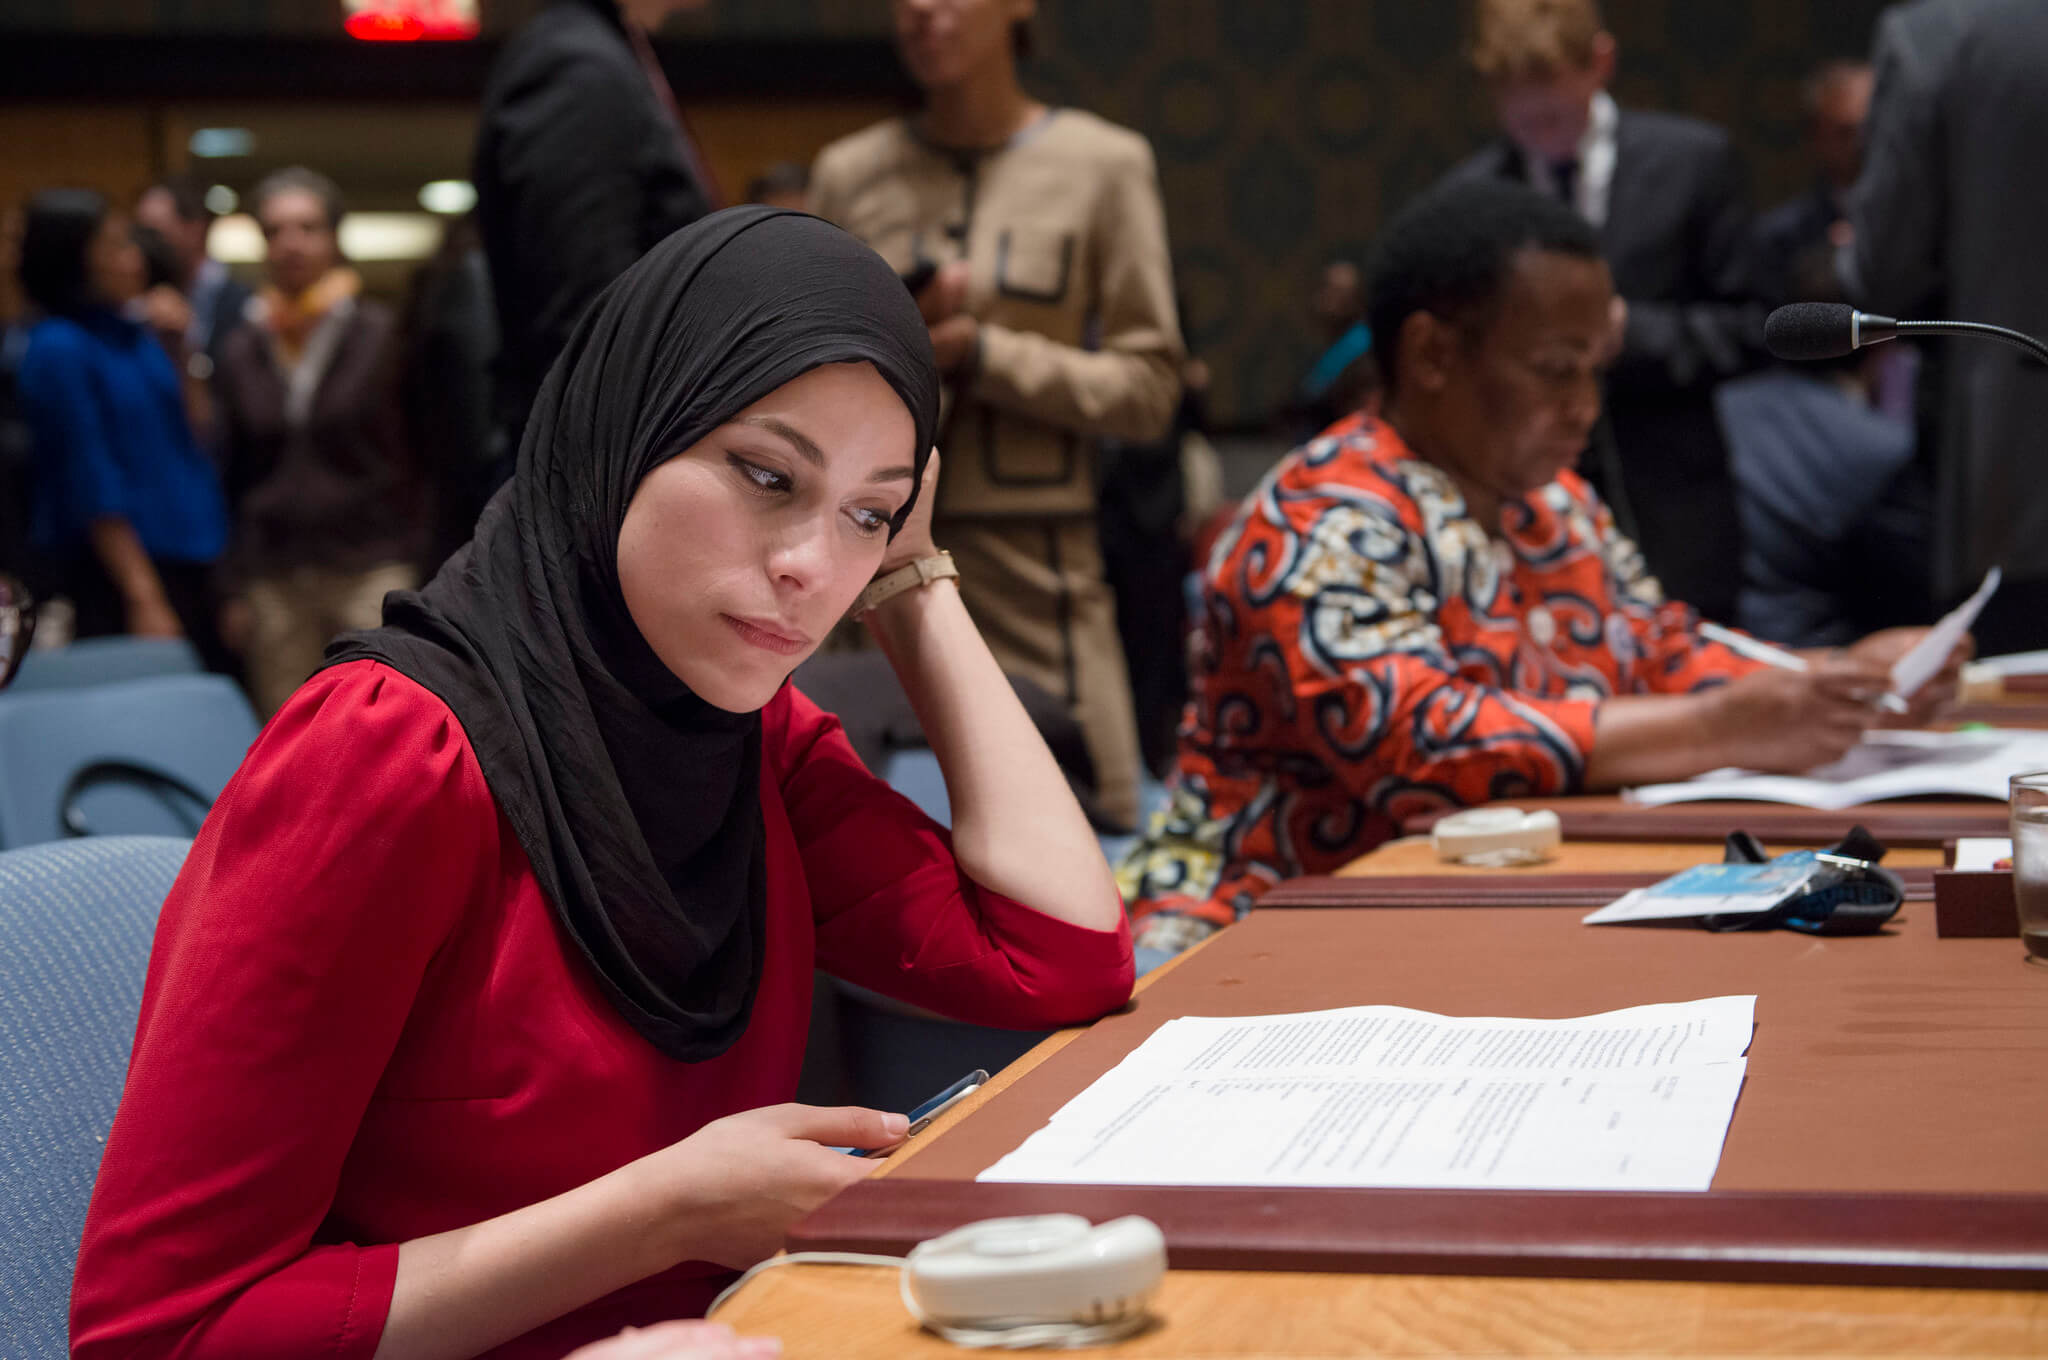 Joachim Alaa Murabit of the non-governmental organization Voice of Libyan Women, during a debate on women, peace and security in the UN Security Council in October 2015. UN Photo